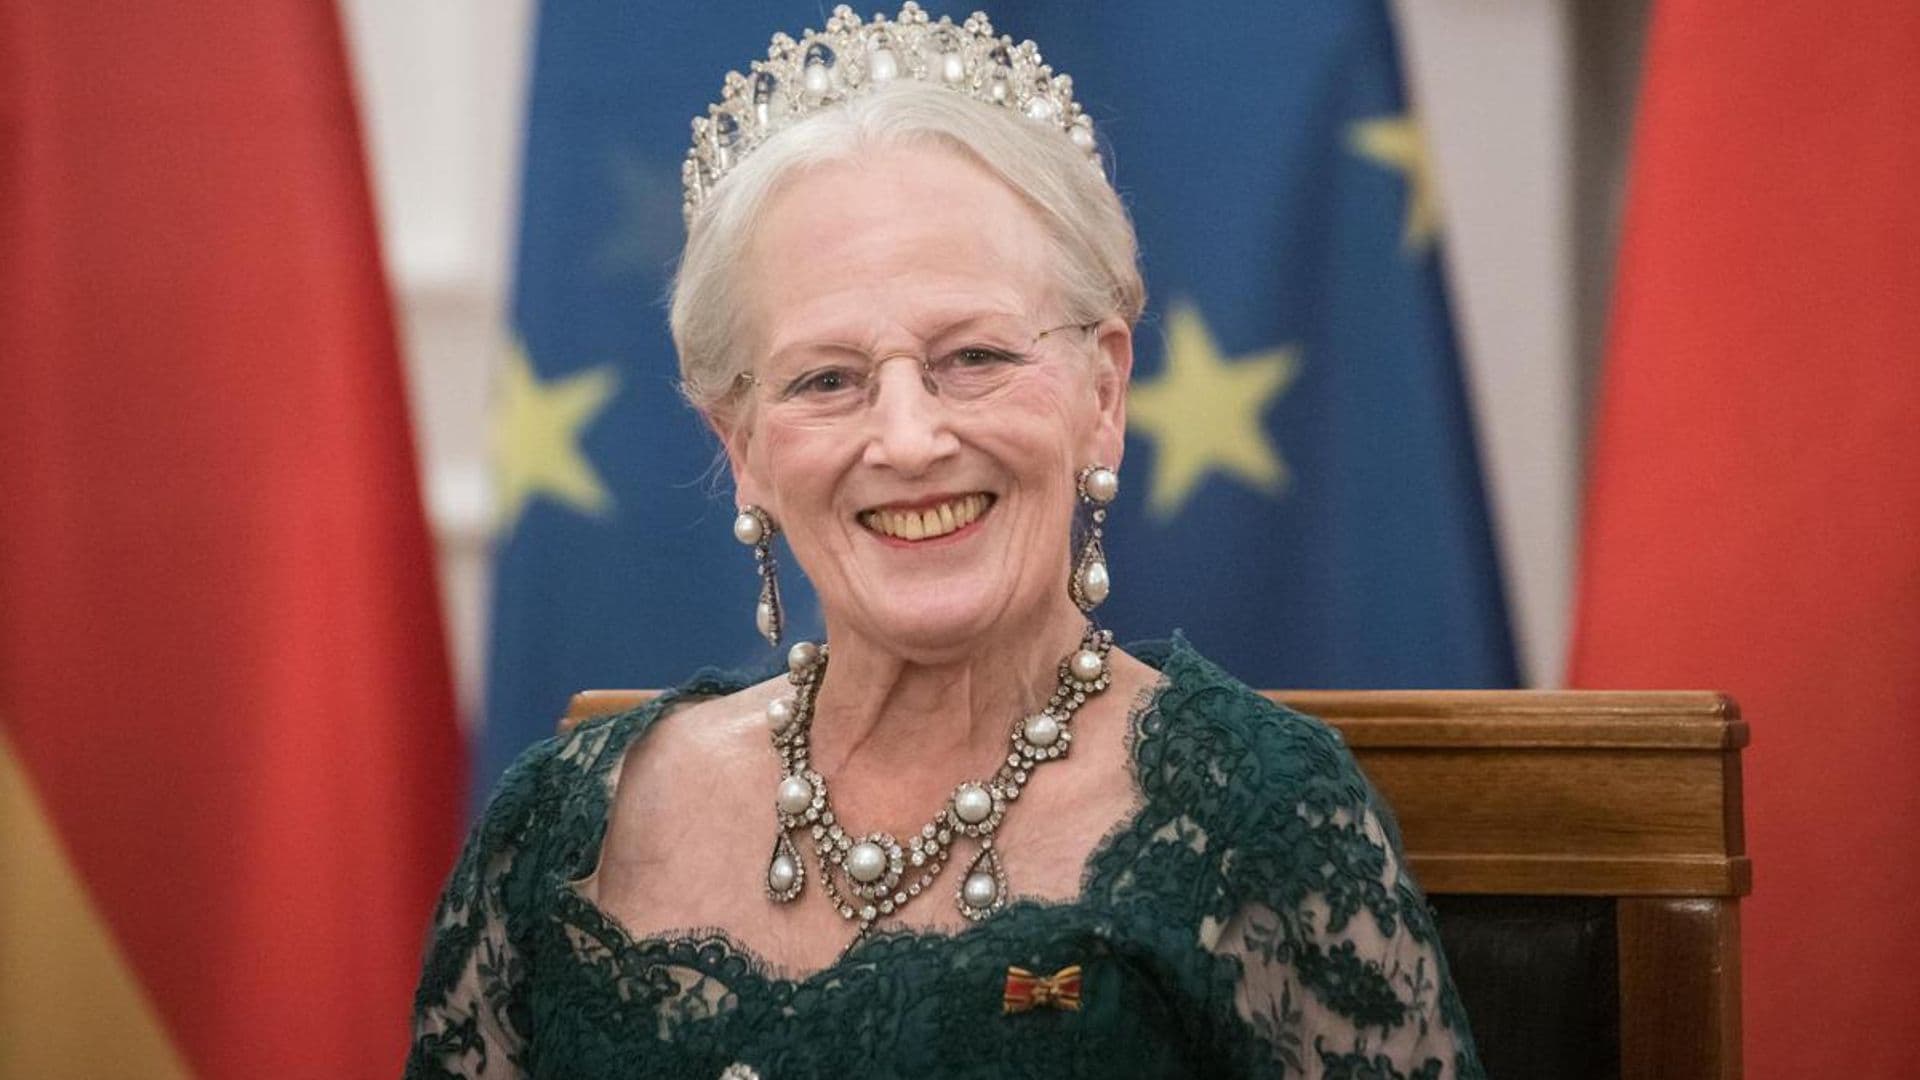 What will be Queen Margrethe's title after she steps down as Queen?